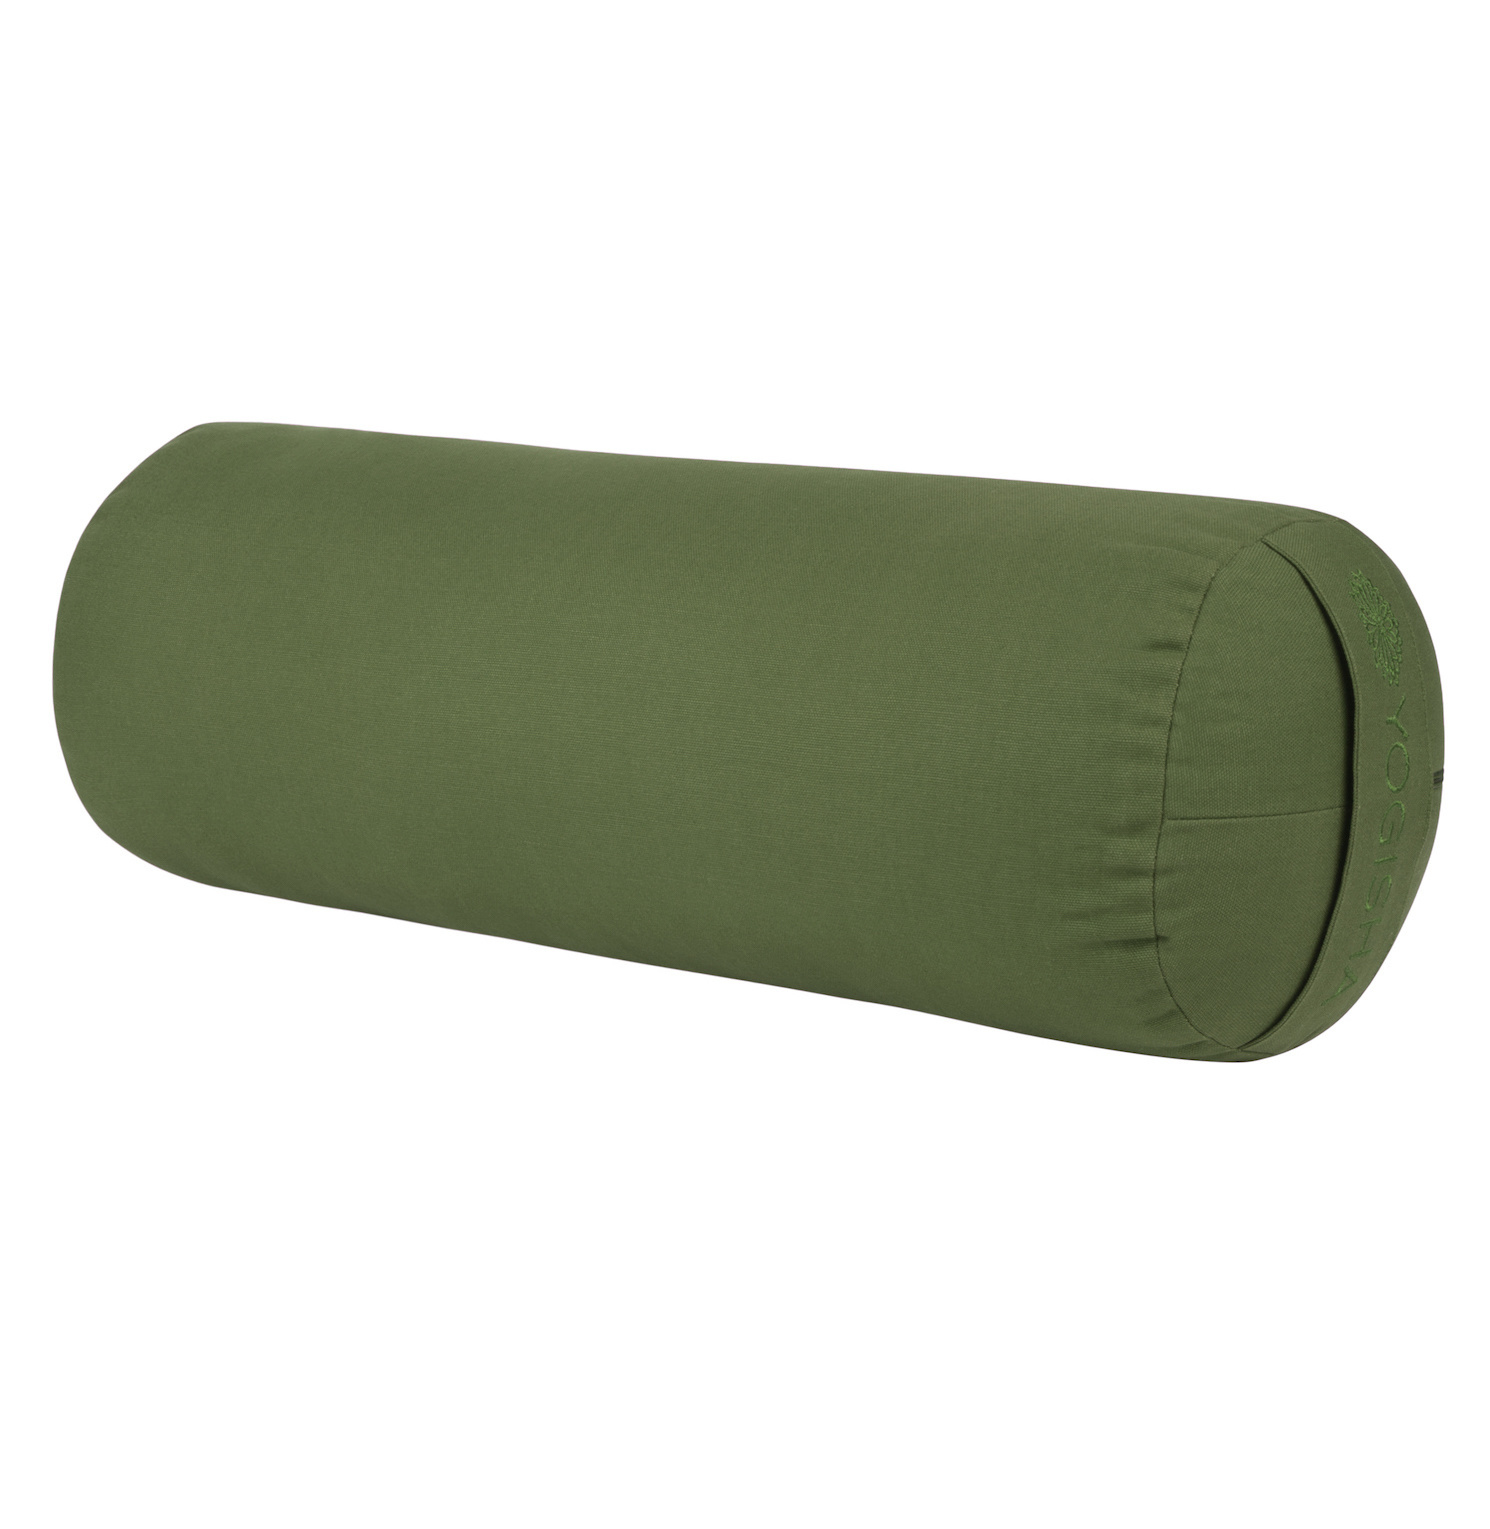 Yogisha Losse Hoes voor Yoga Bolster Rond-3